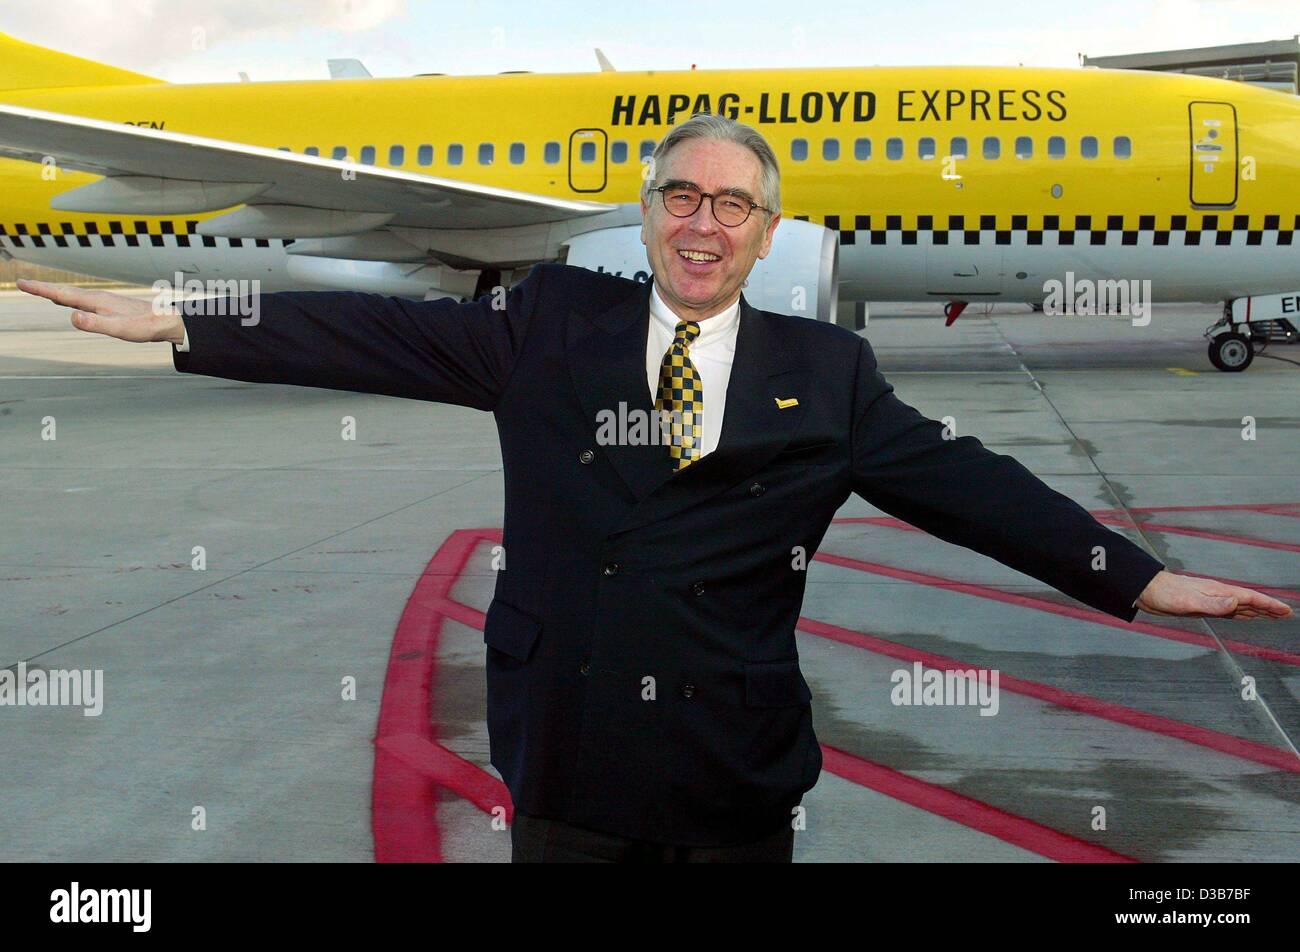 dpa) - Wolfgang Kurth, general manager of the airline Hapag-Lloyd Express,  stretches his arms simulating an aircraft at the Cologne Bonn Airport, 3  December 2002. The Boeing 737-700 in the background with